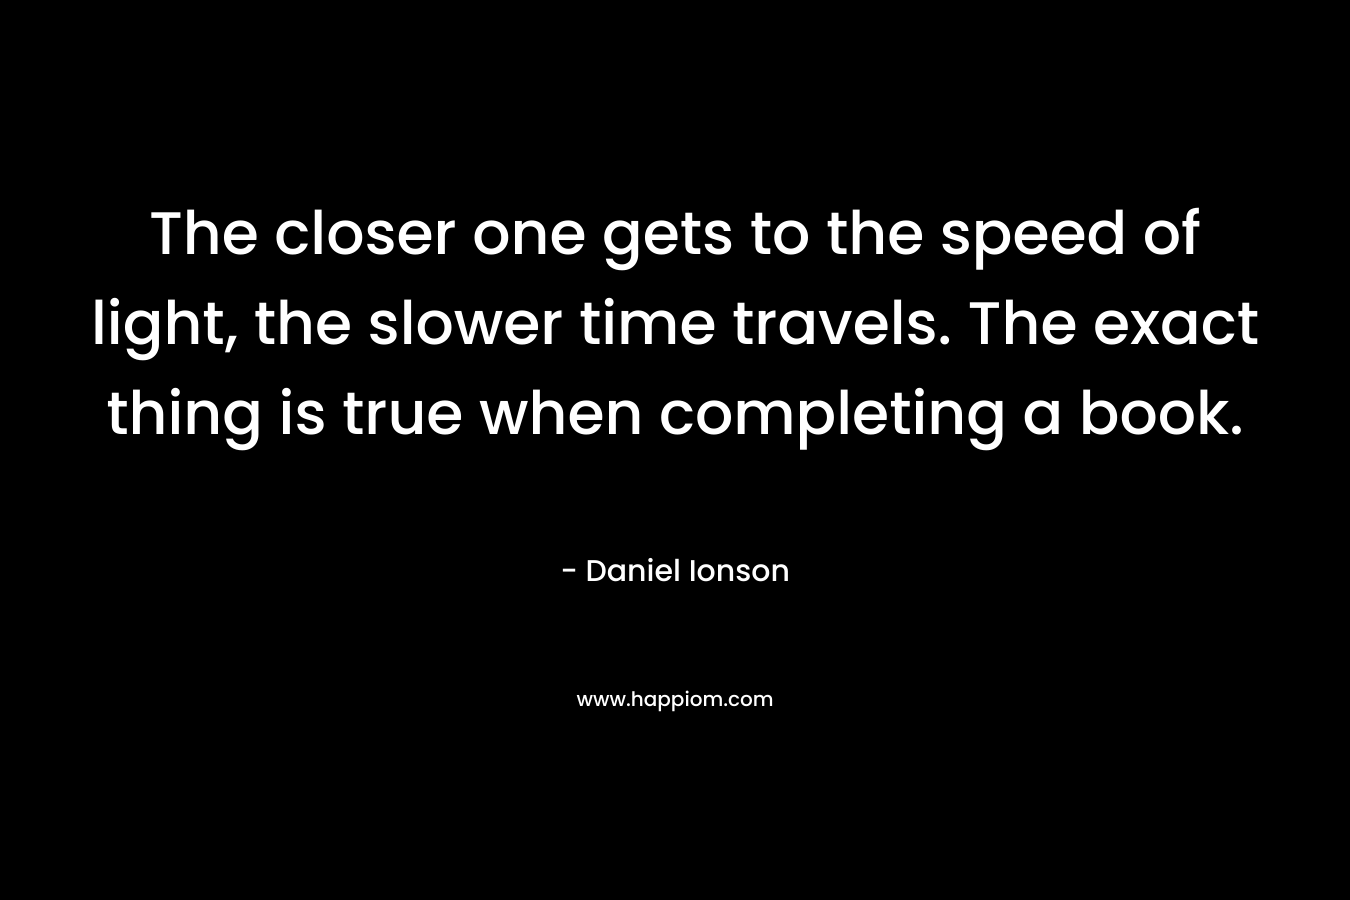 The closer one gets to the speed of light, the slower time travels. The exact thing is true when completing a book. – Daniel Ionson